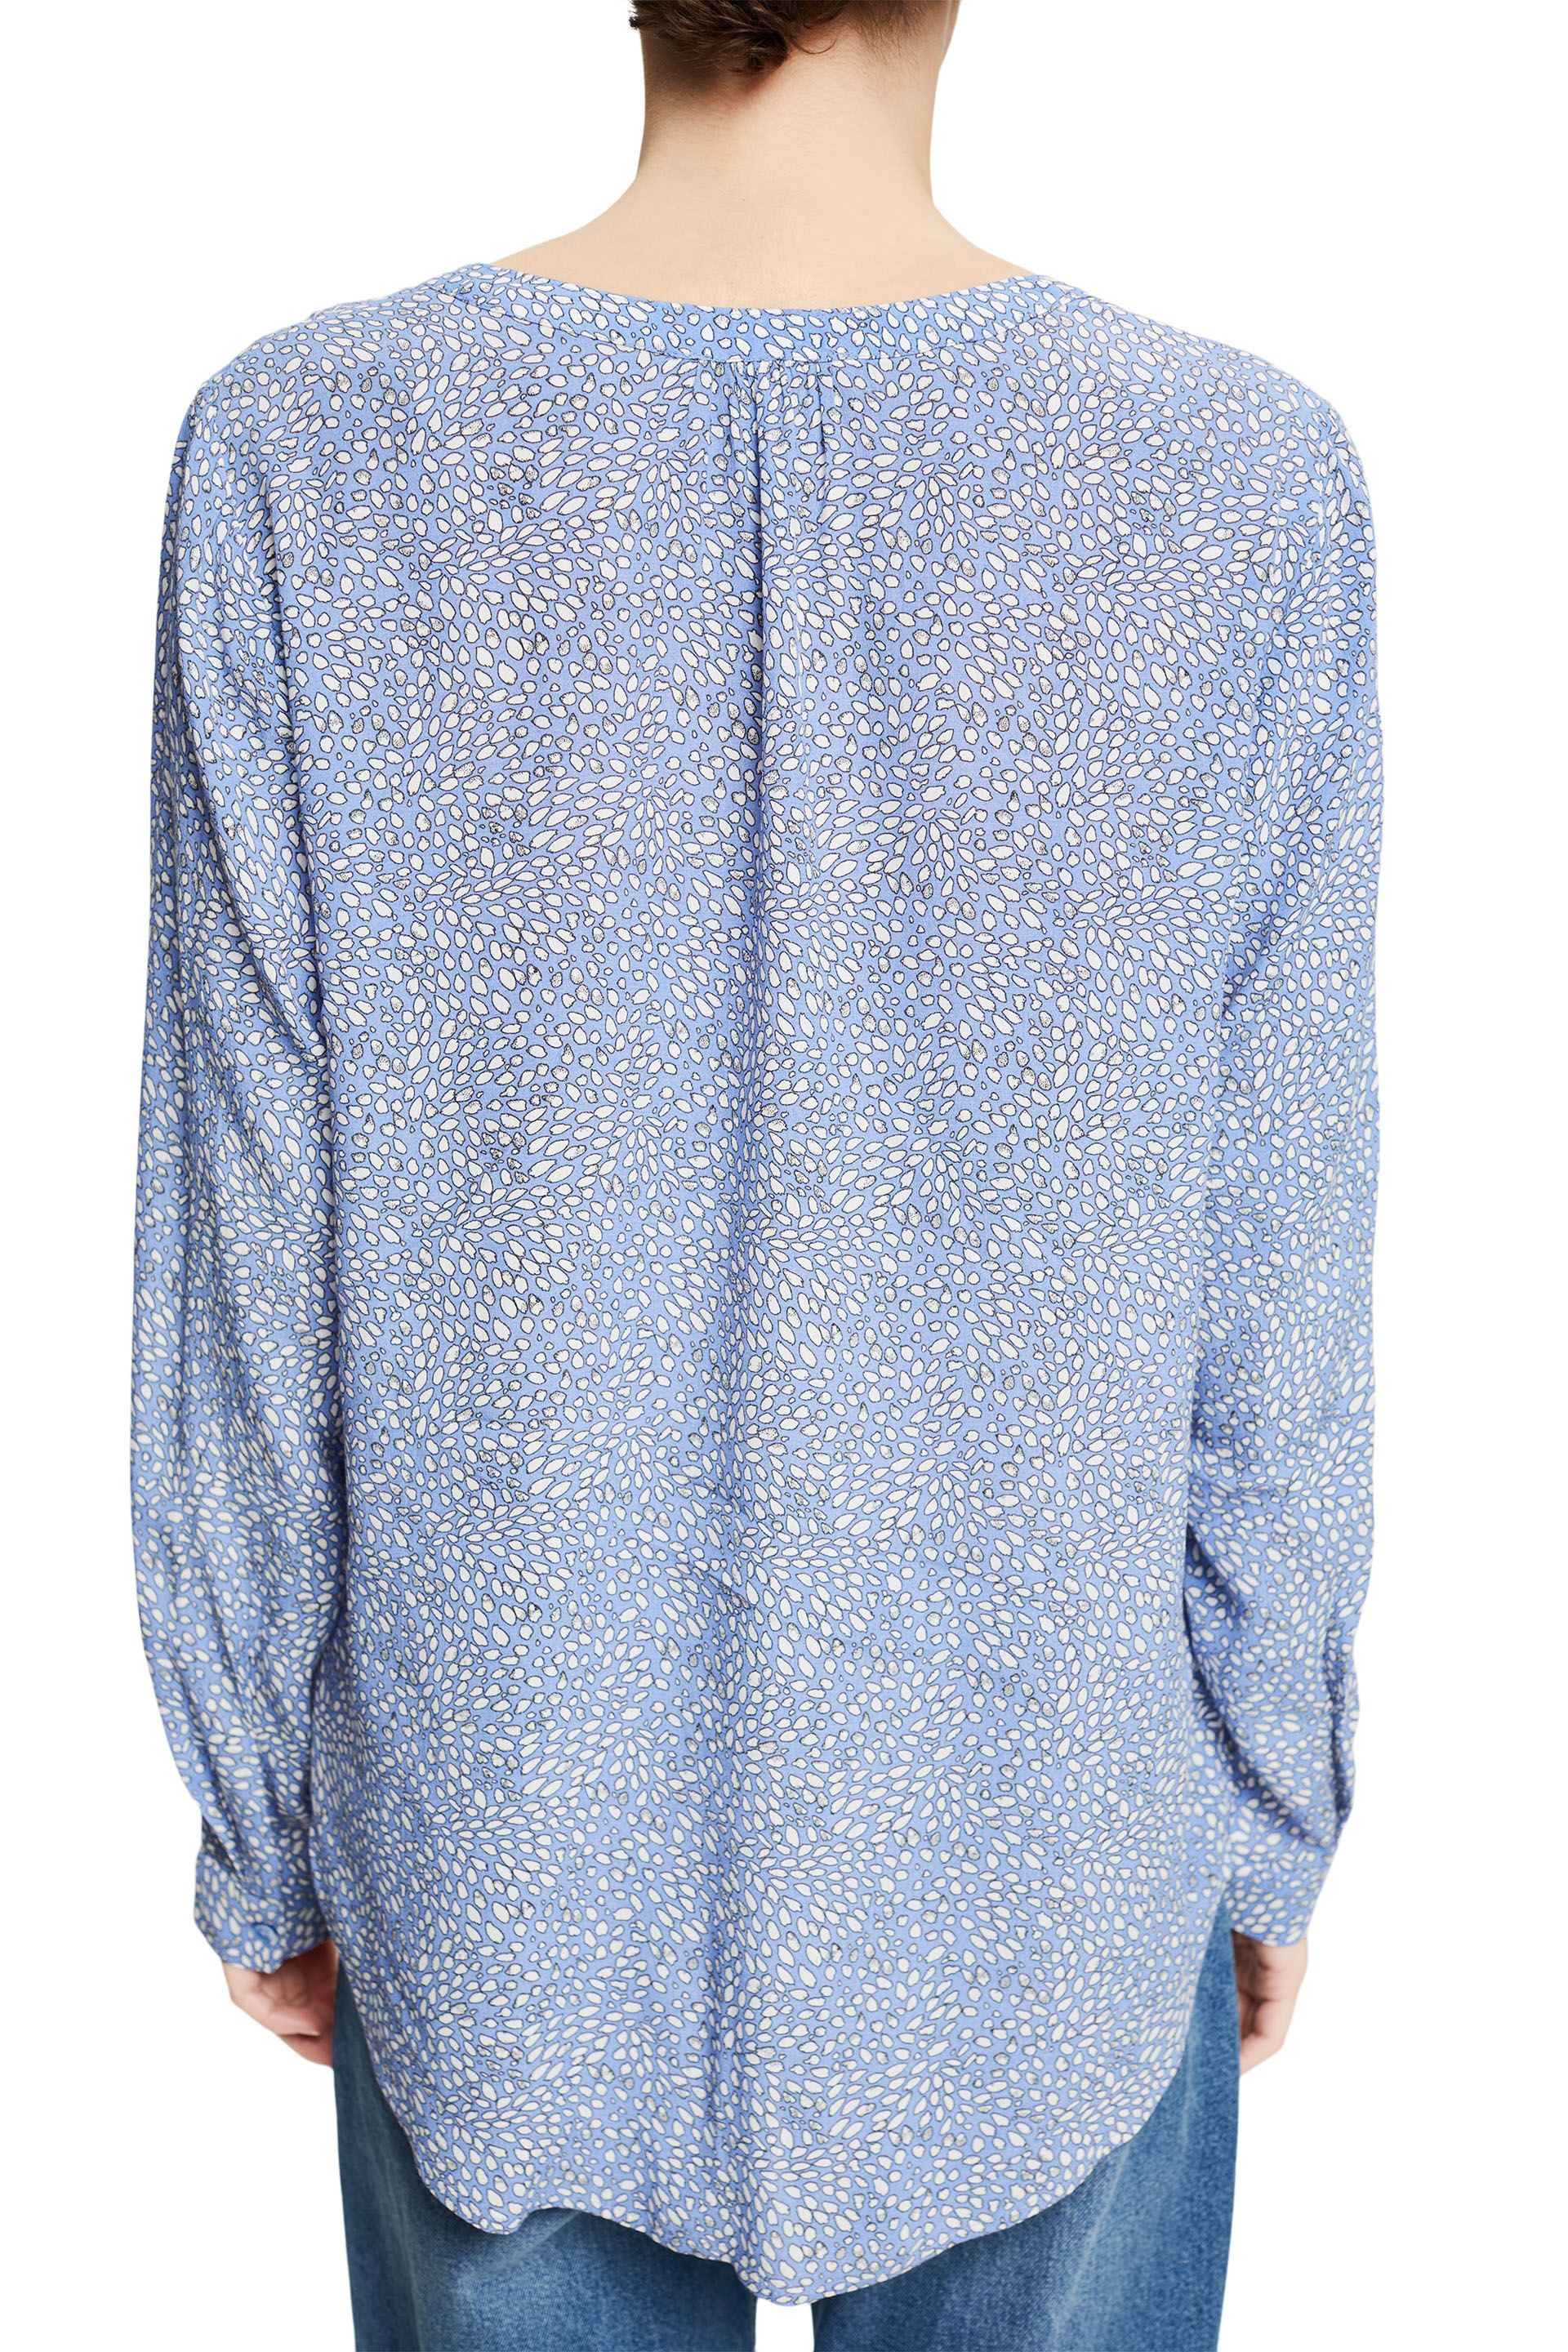 Blouse with pattern, Light Blue, large image number 1